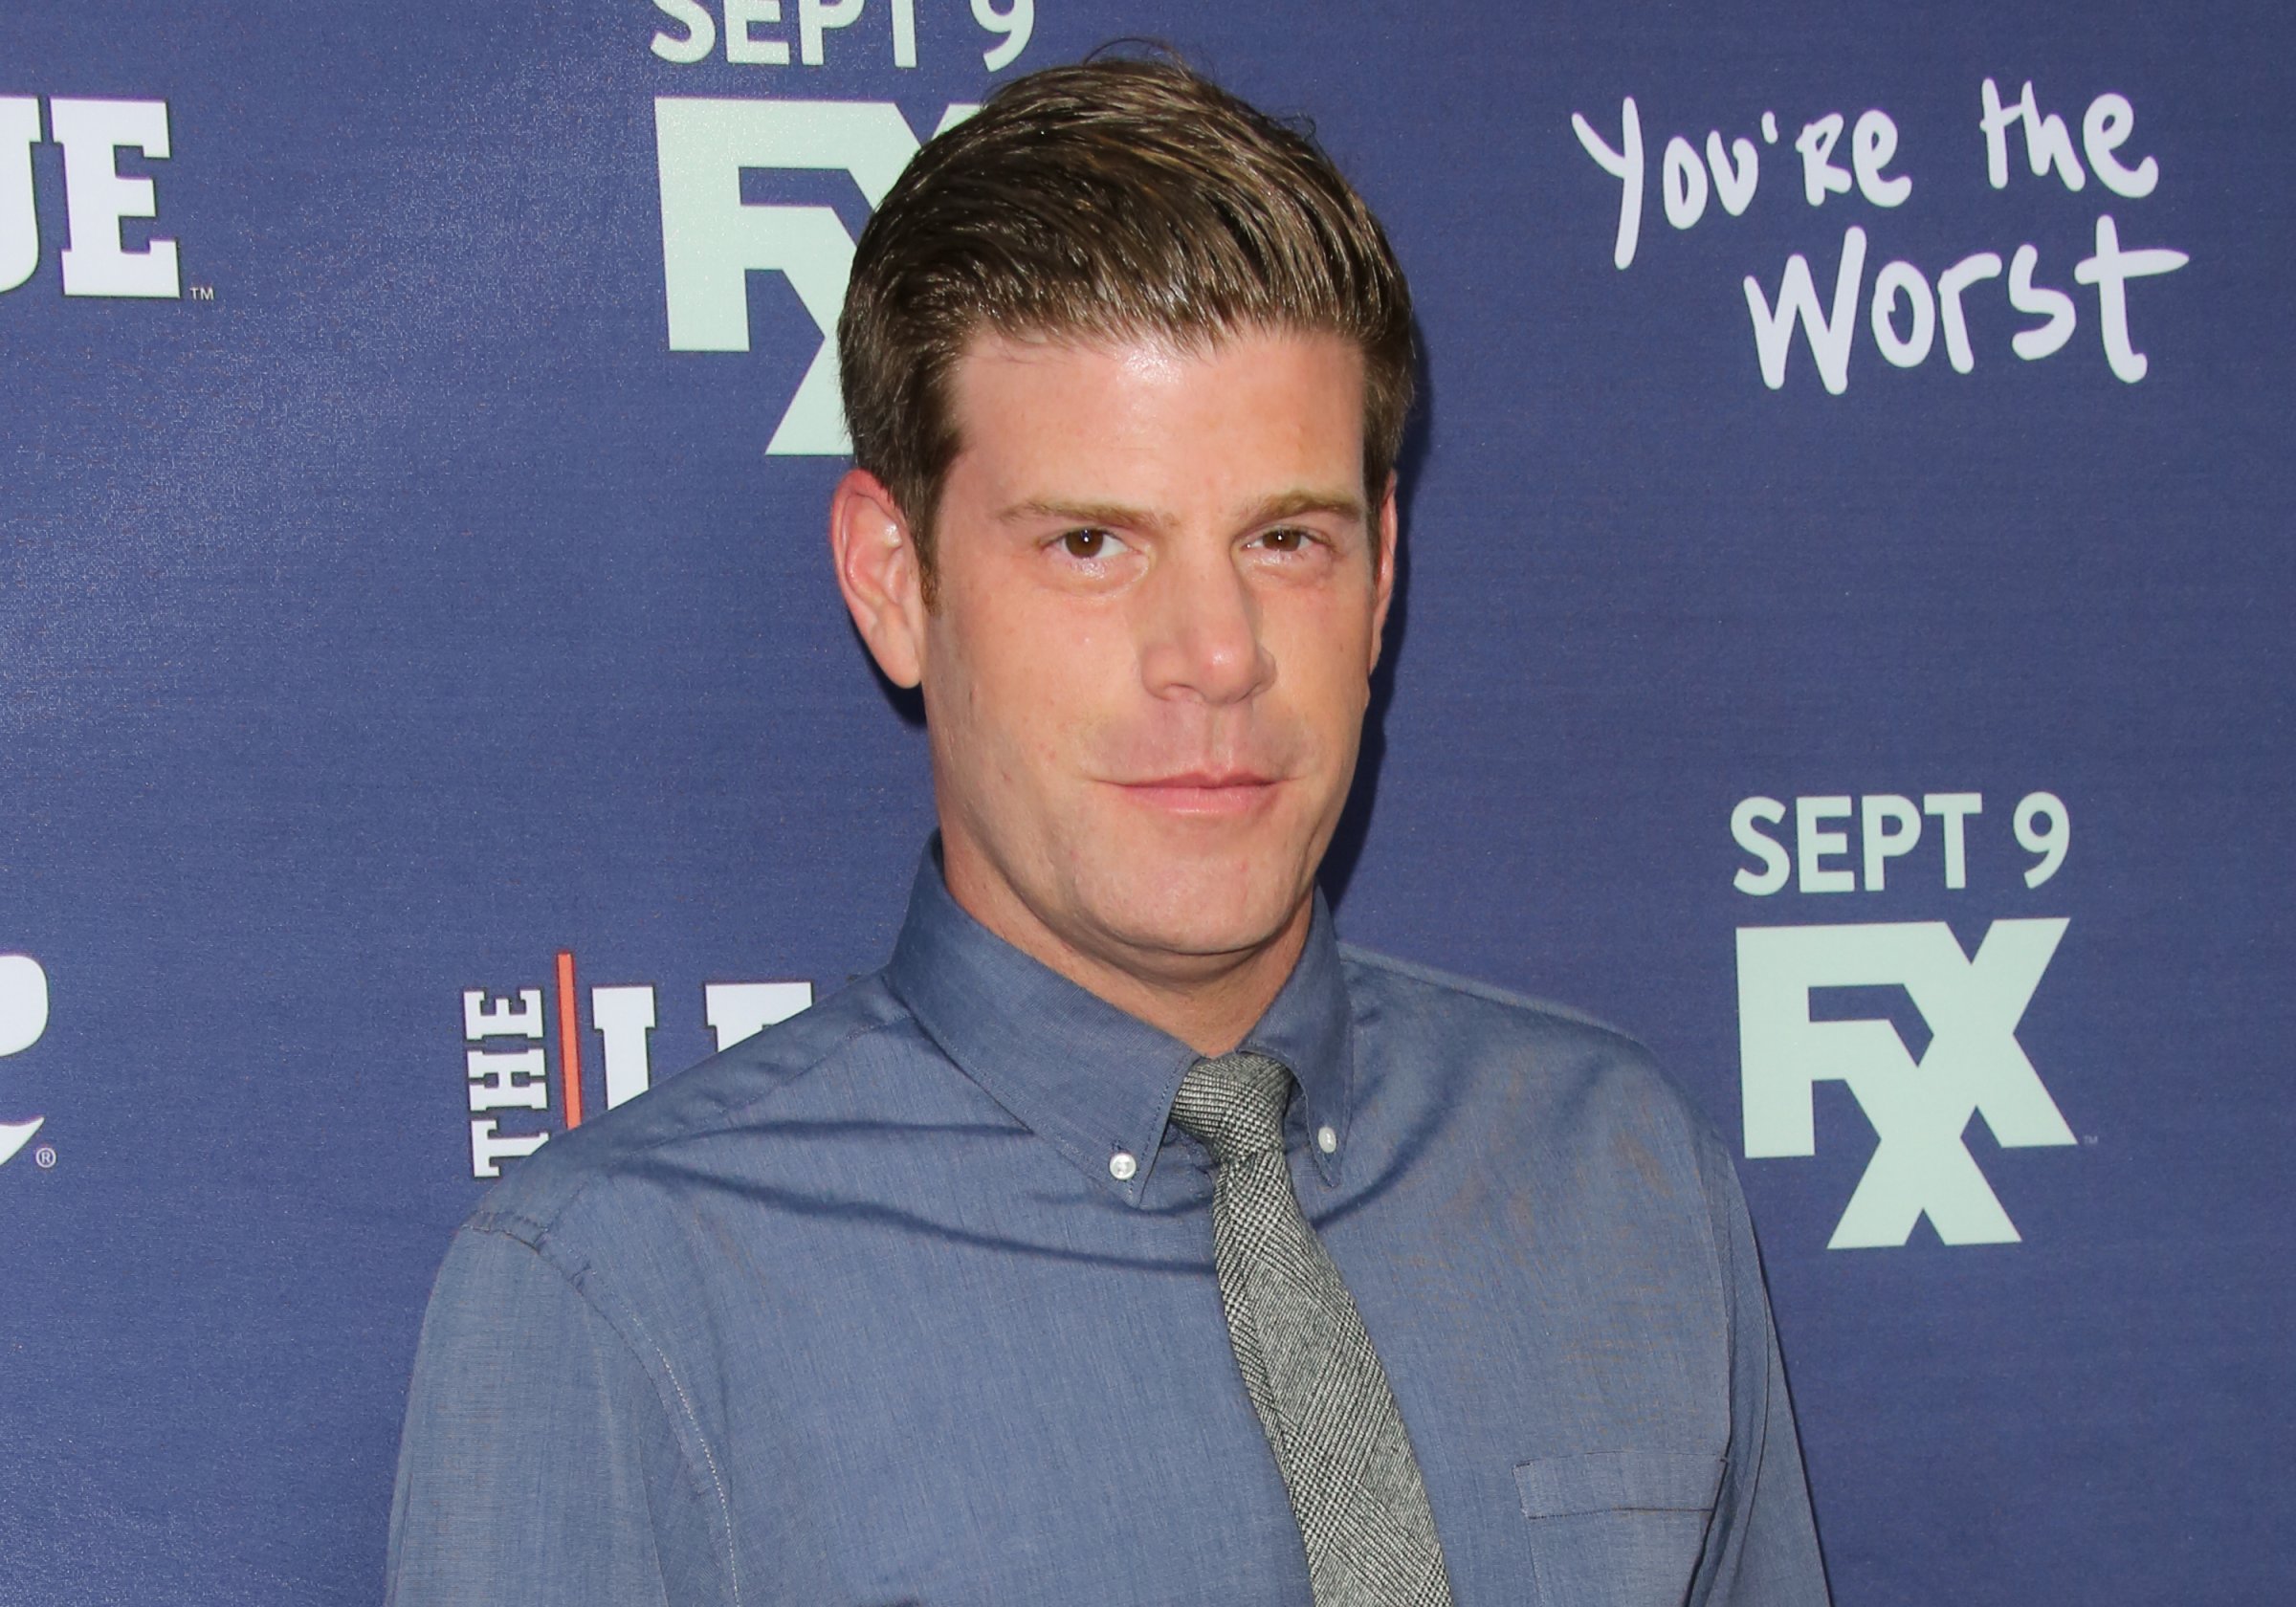 Actor Stephen Rannazzisi attends the premiere of FXX's "The League" final season and "You're The Worst" 2nd season at Regency Bruin Theater in Westwood, California on Sept. 8, 2015.